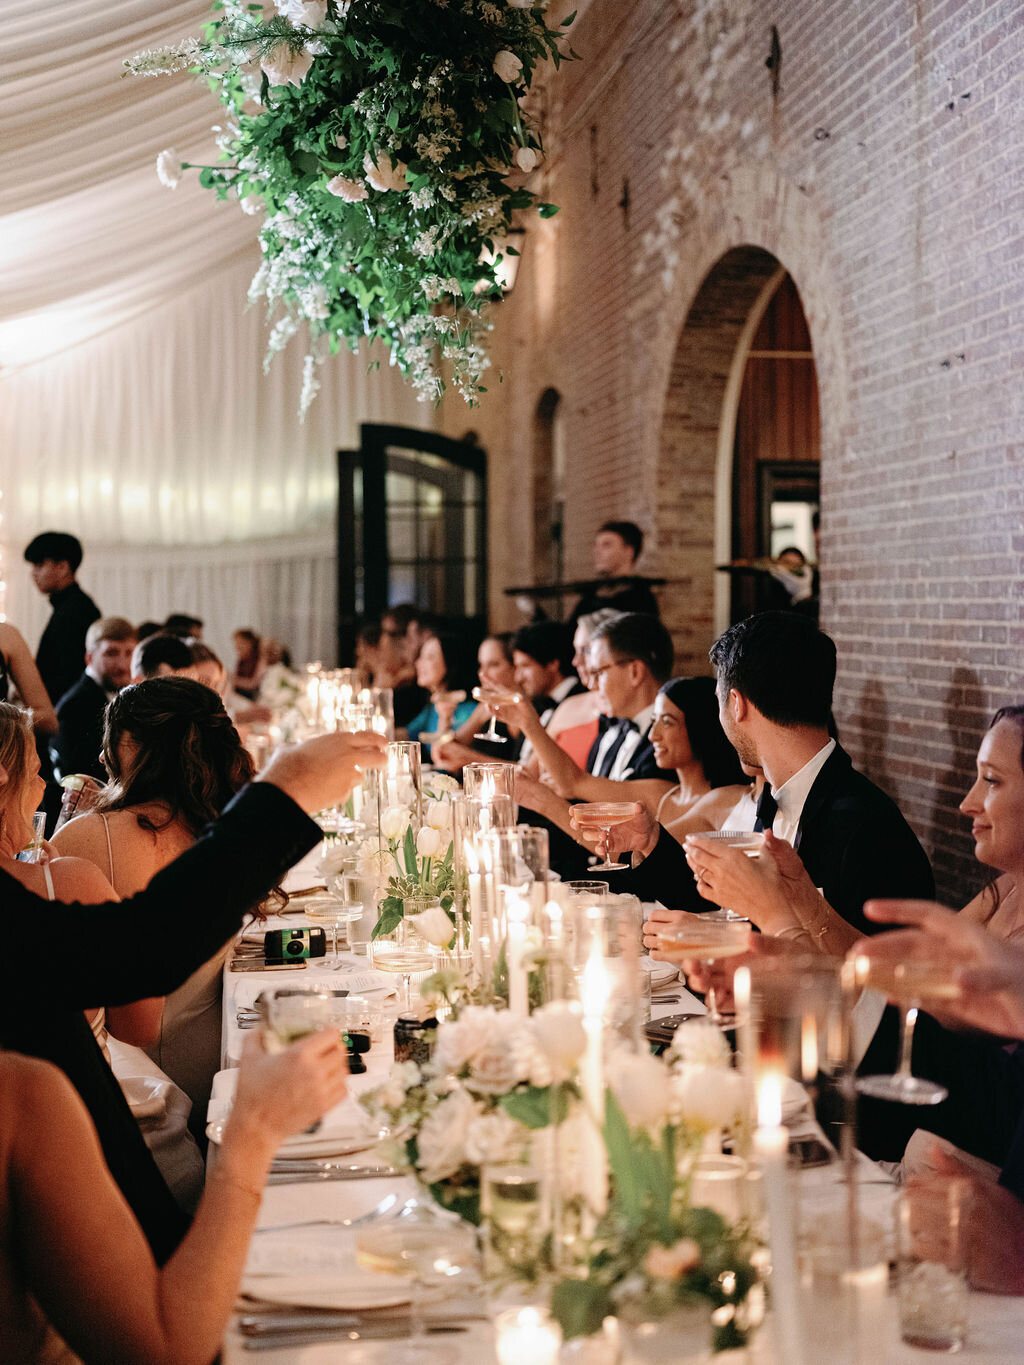 Guests sitting at a candlelit head table at reception Evergreen Museum Carriage House under a hanging installation